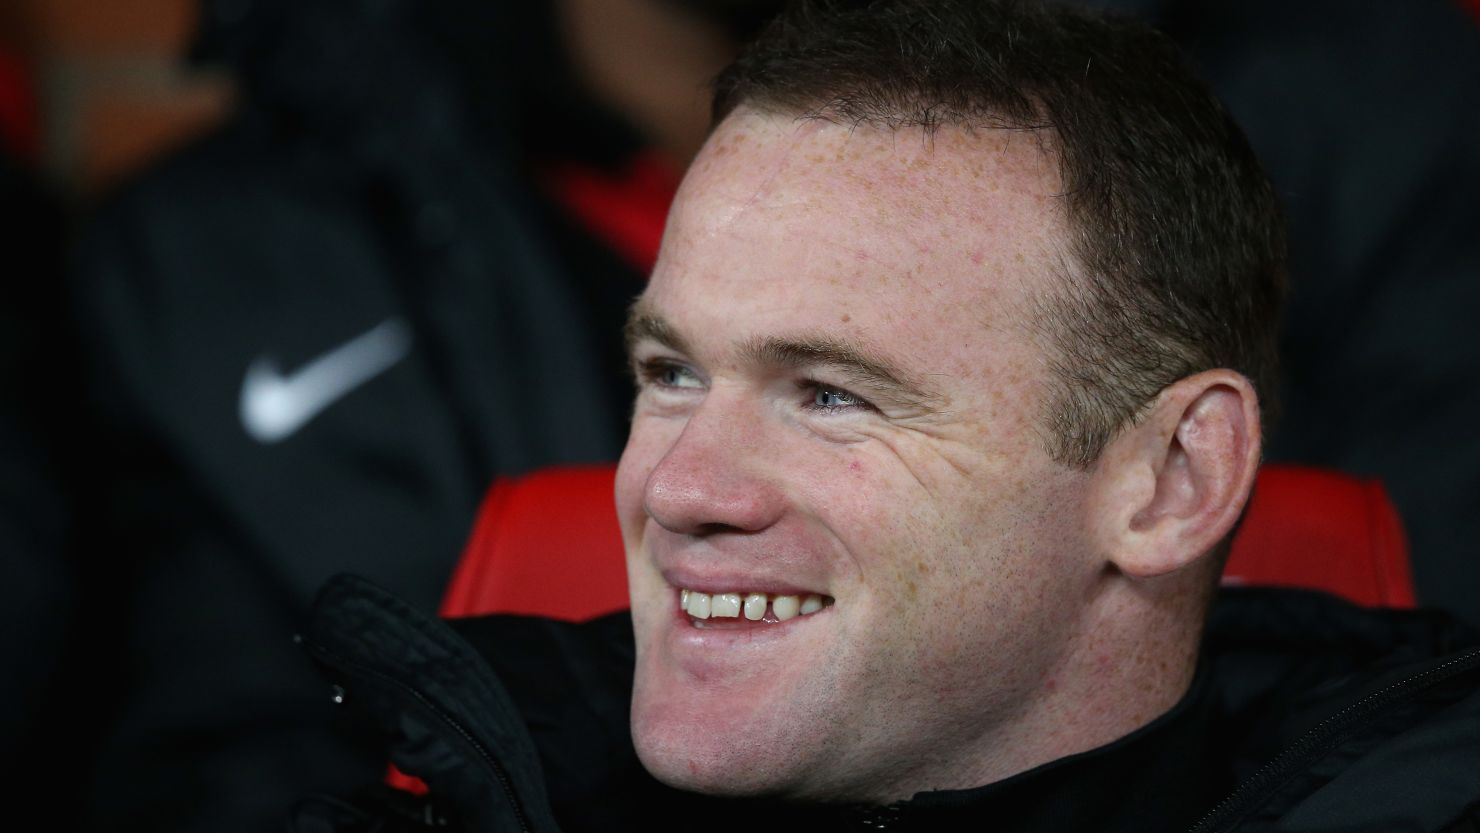 Wayne Rooney ended months of speculation about his future on Friday by putting pen to paper on a new Man United contract.